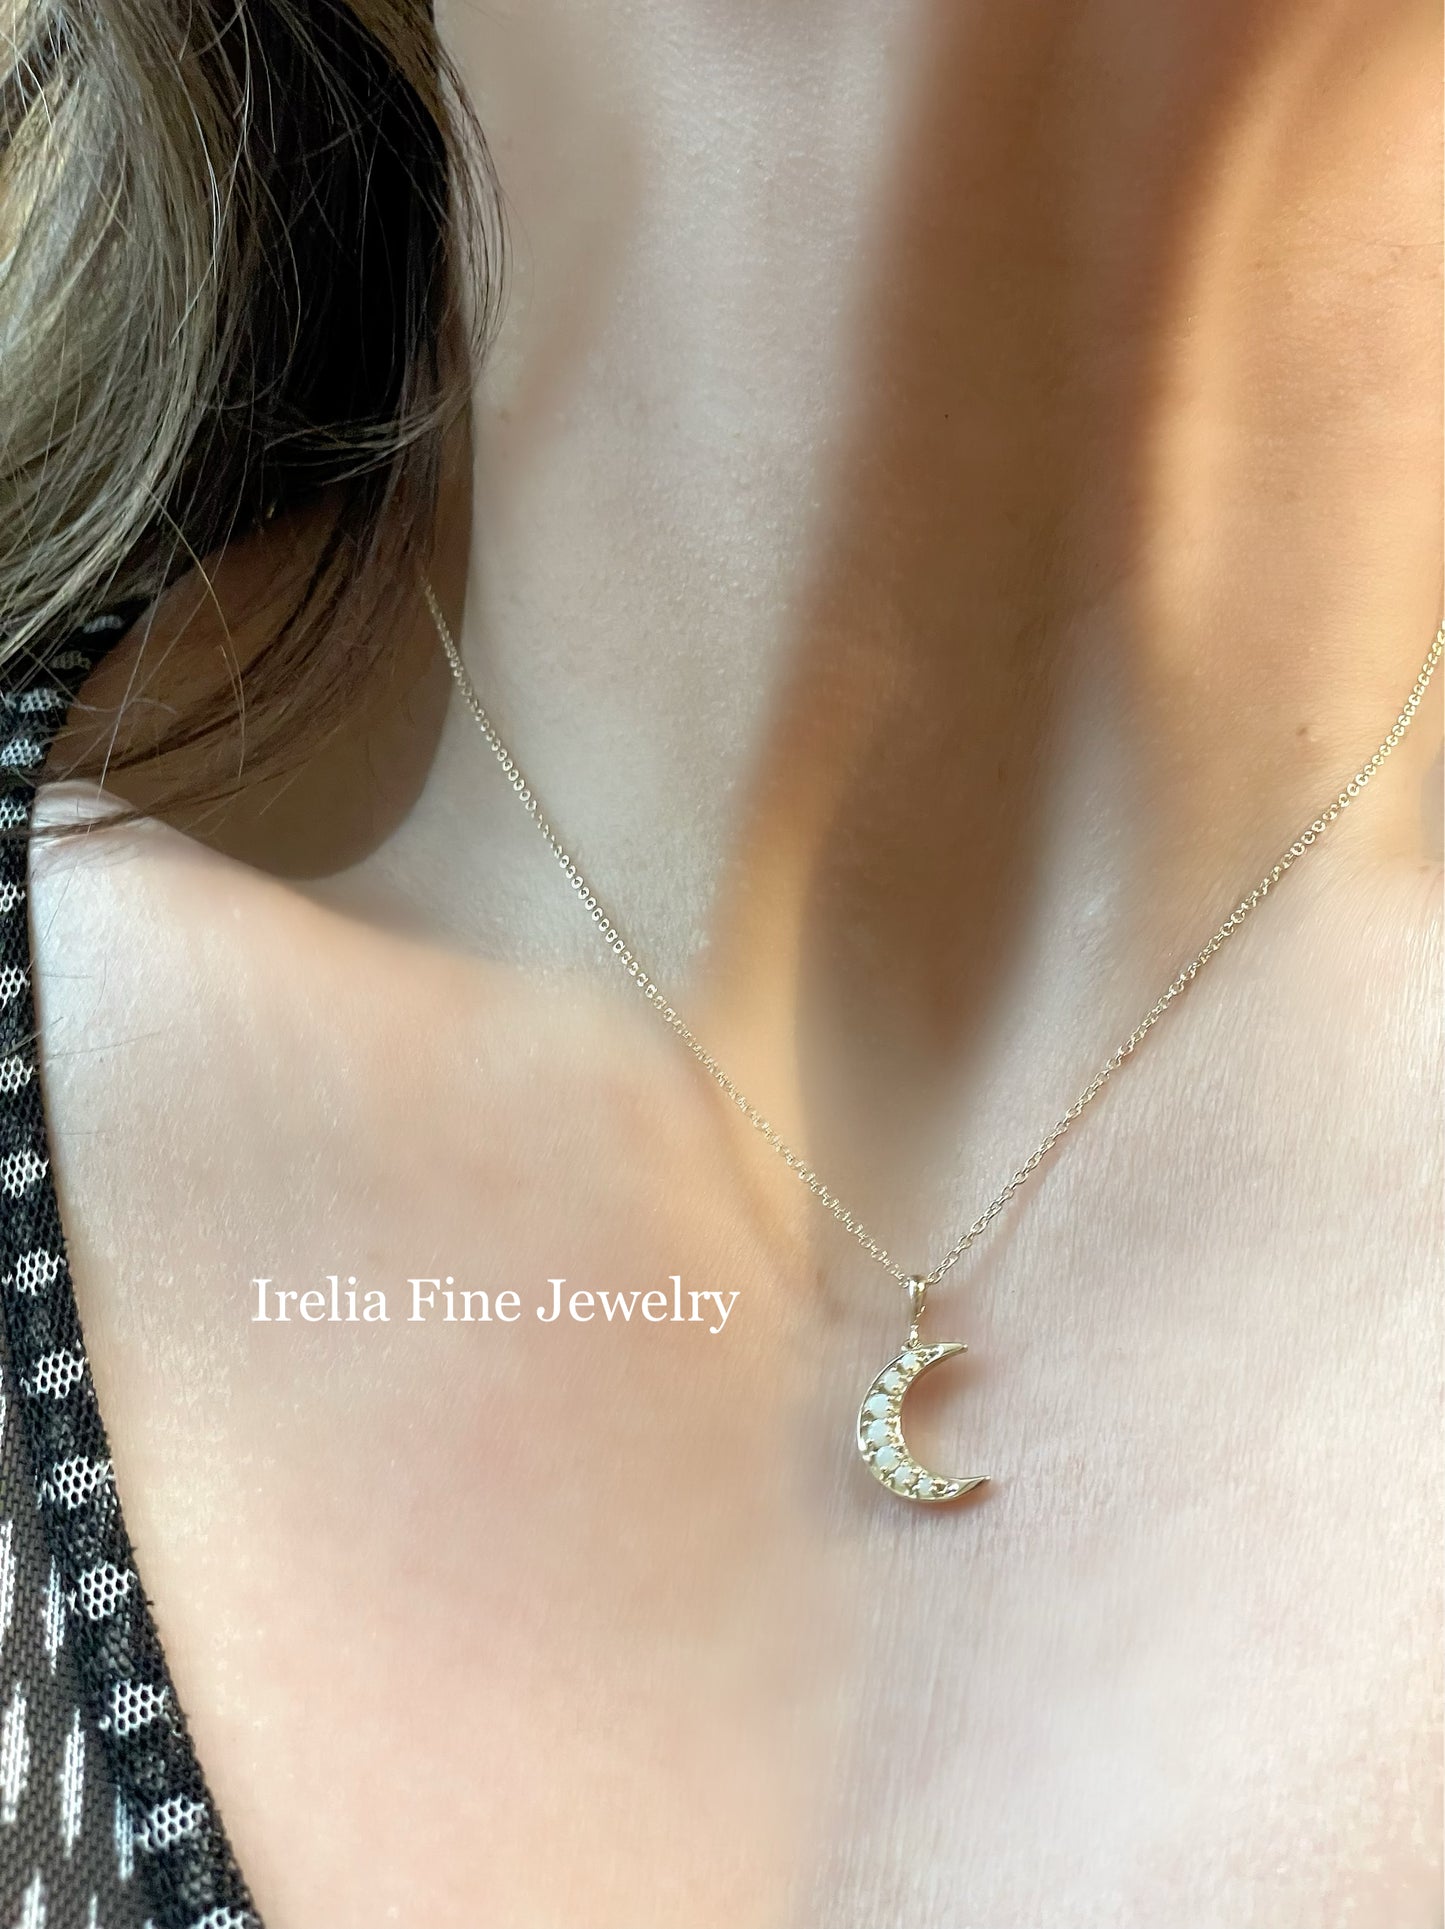 14K Yellow Gold Natural White Opal Cabochon Crescent Moon, comes with 14k yellow gold adjustable chain